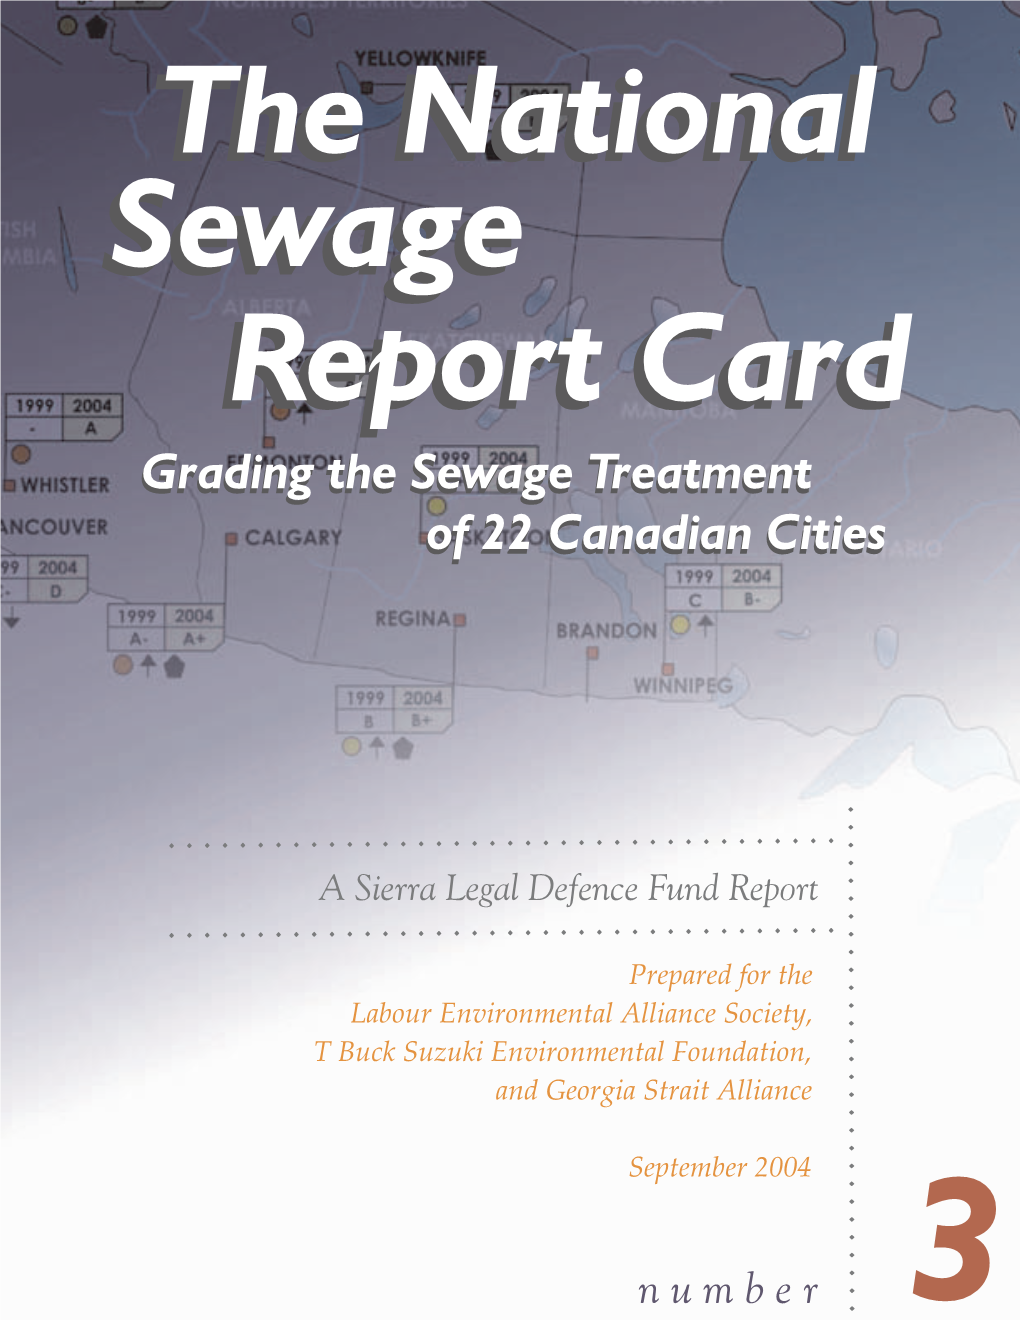 National Sewage Report Card (Number Three): Grading the Sewage Treatment of 22 Canadian Cities